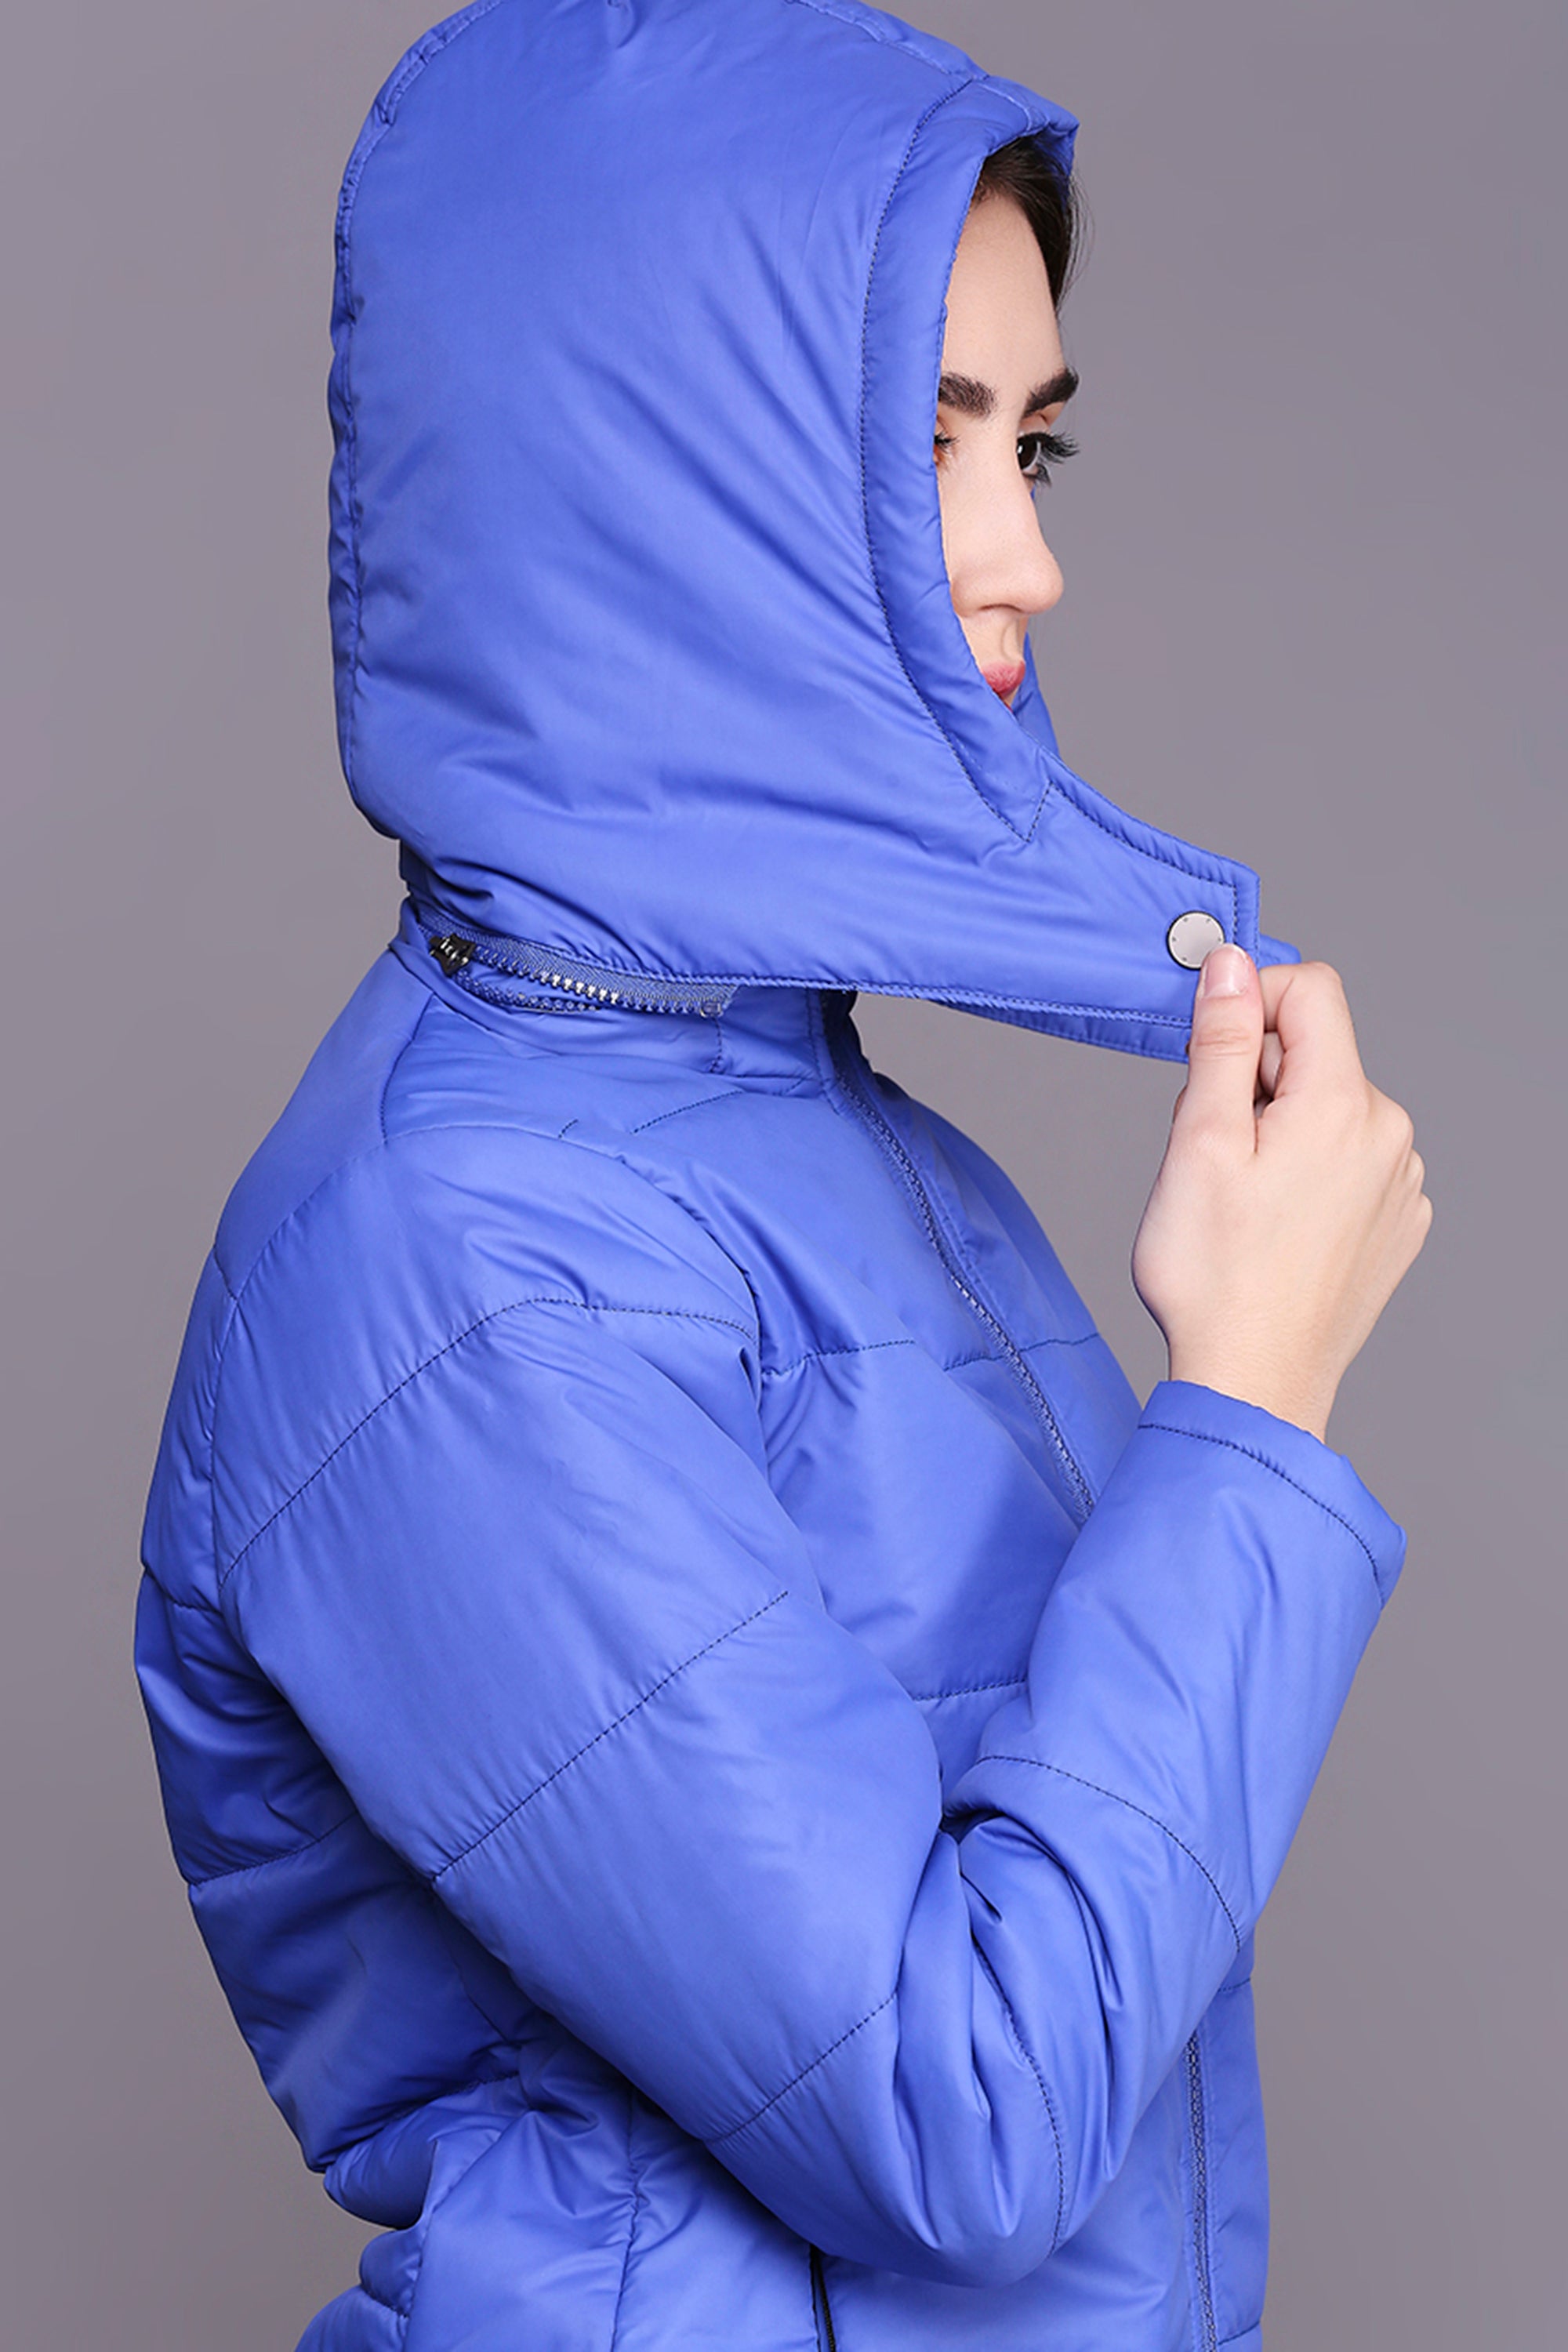 Electric Blue Mid Length Puffer Women's Jacket